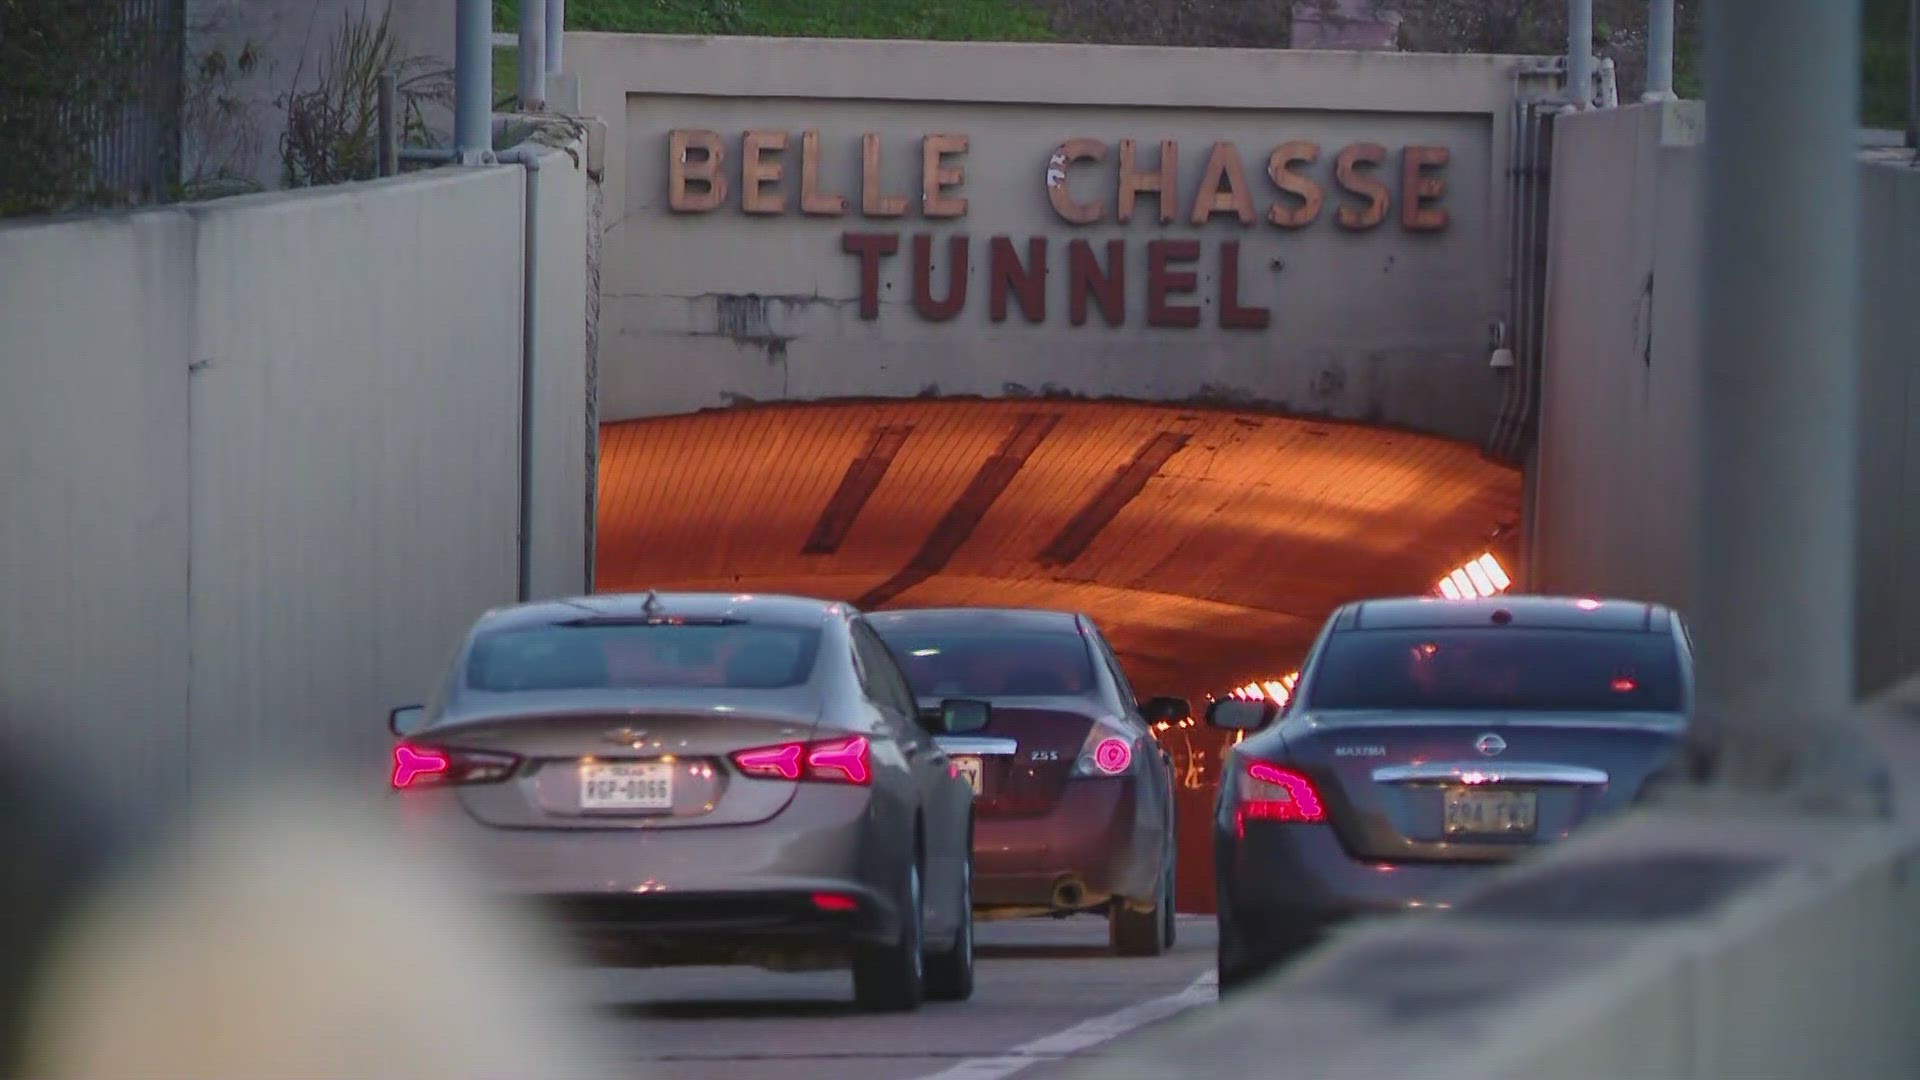 The Belle Chasse tunnel will be closing permanently as a new bridge over the water won't have to close to let ships pass.